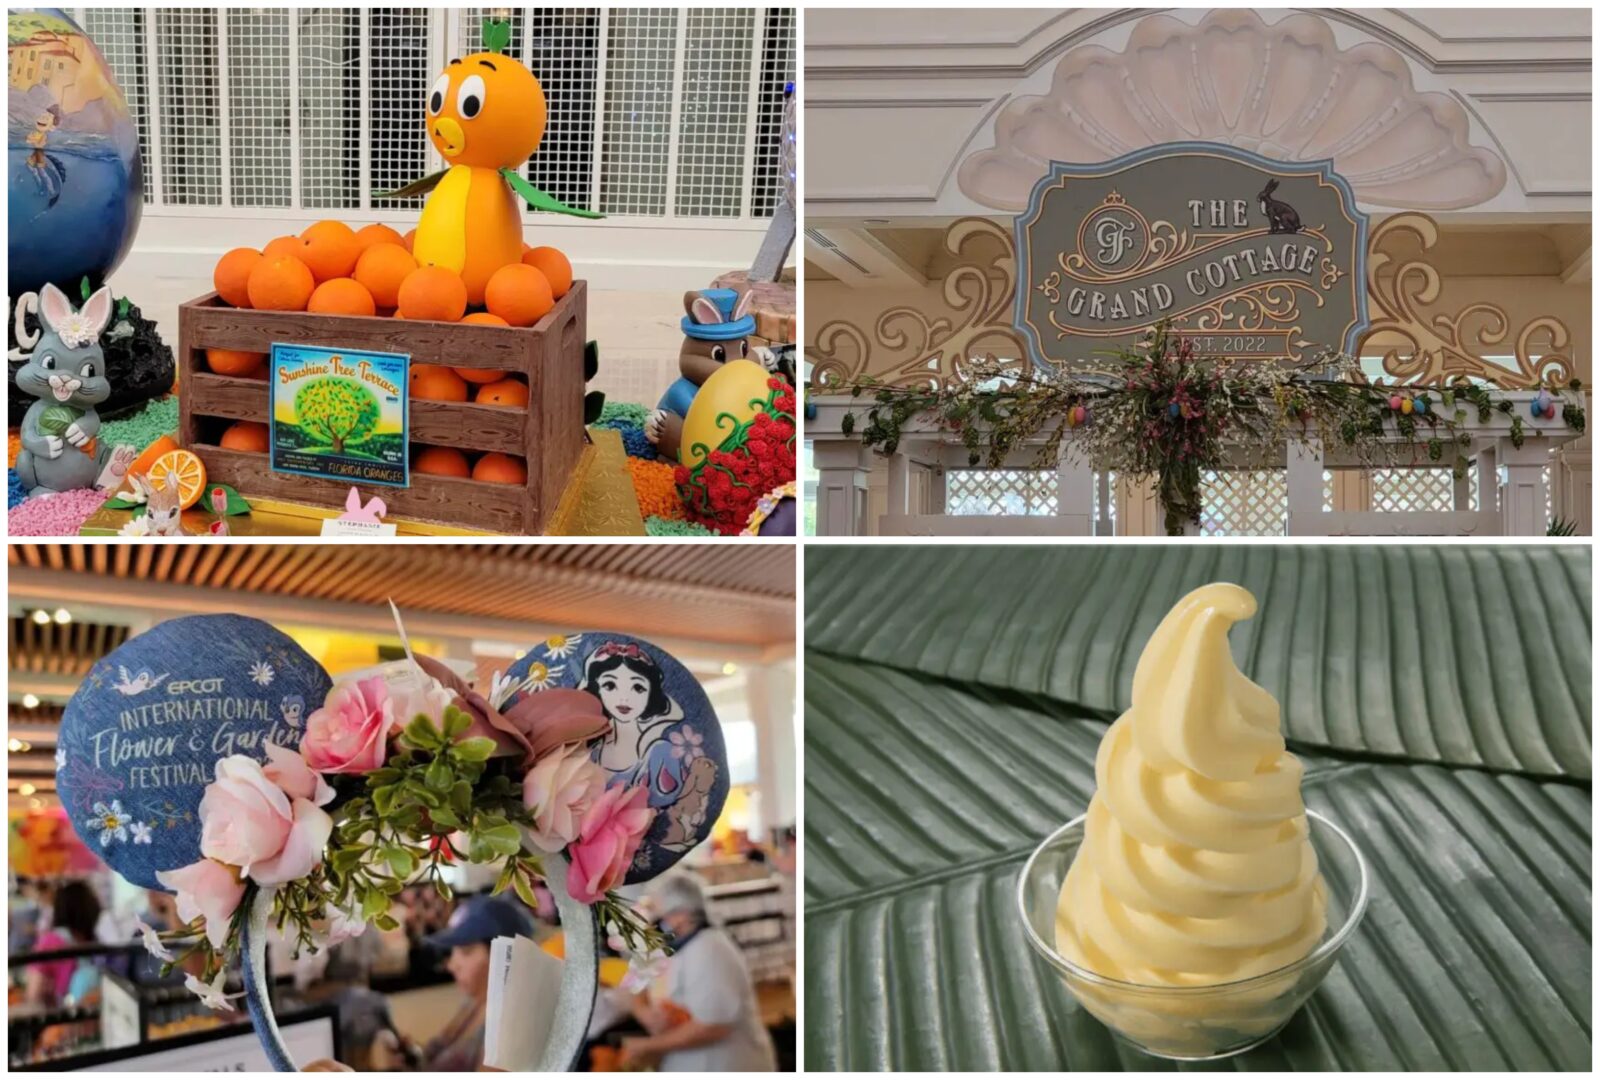 Disney News Highlights: The Grand Cottage Returns, New Chocolate Eggs on Display at The Grand Floridian, Galactic Starcruiser Cutting Back